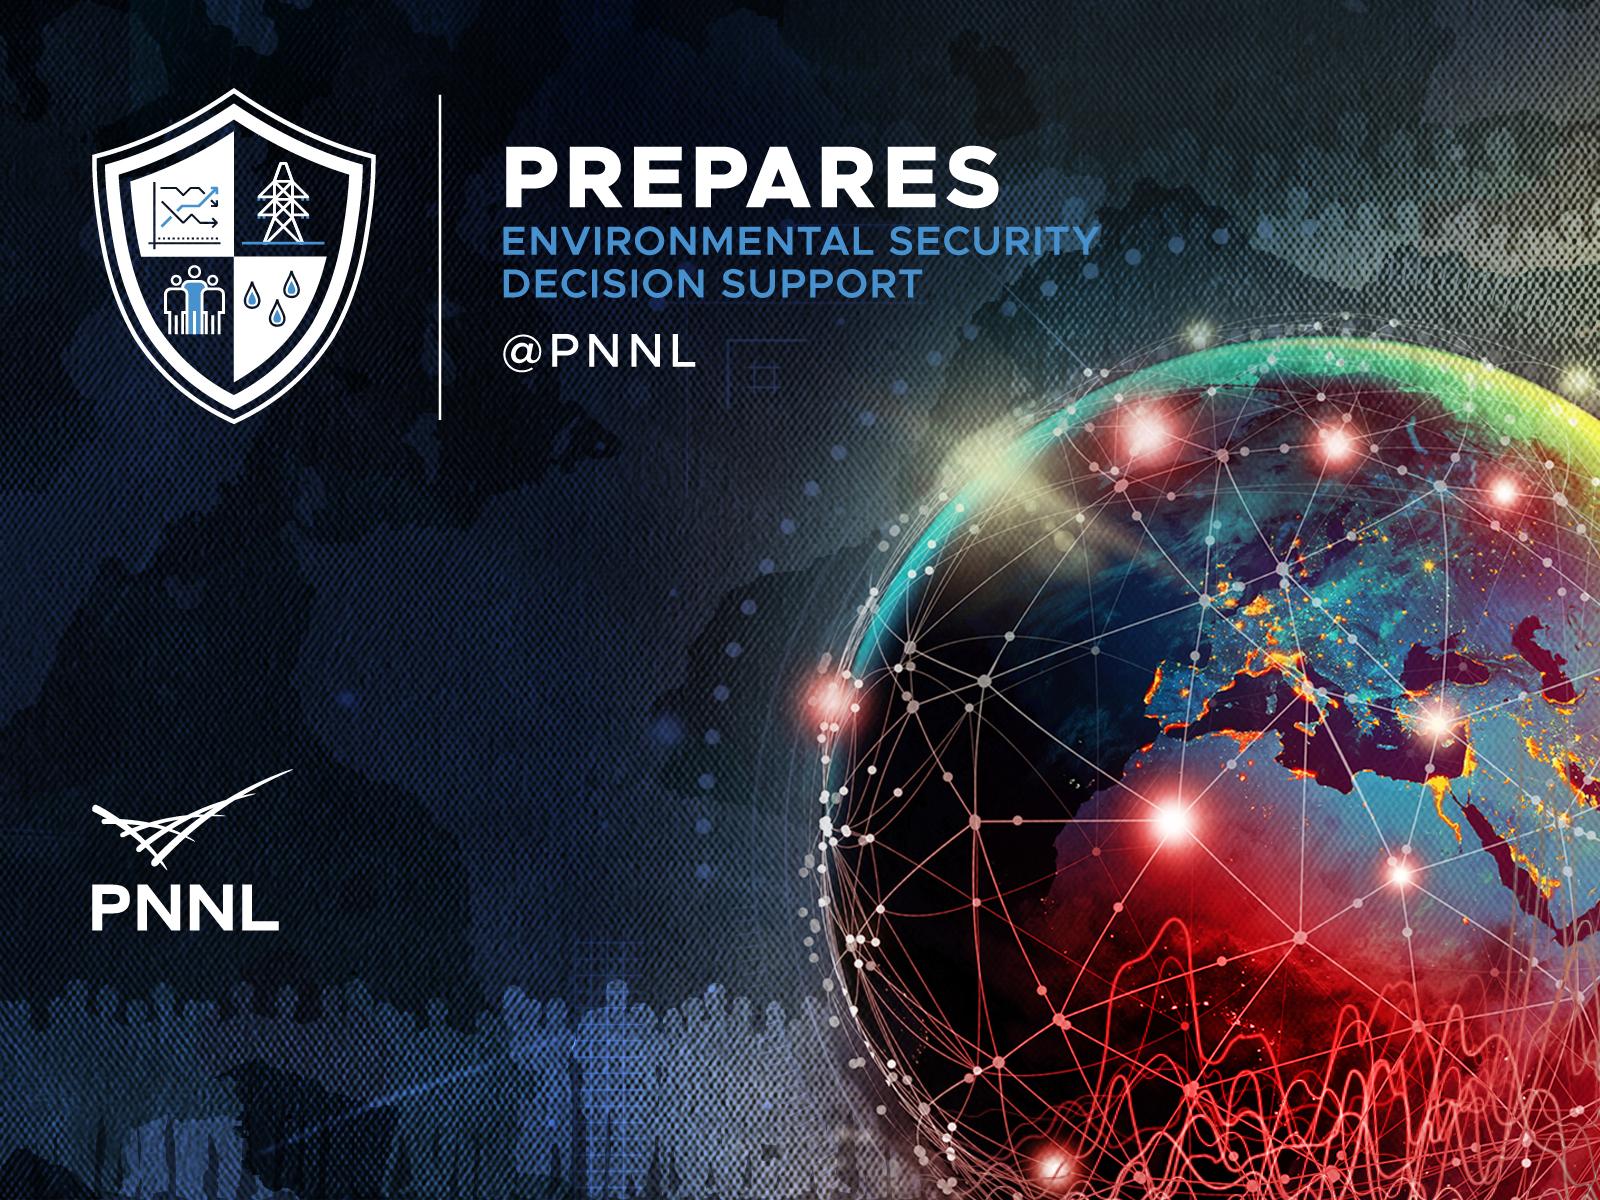 Providing  Research and End-user Products to Accelerate Readiness and Environmental Security (PREPARES) initiative at PNNL.